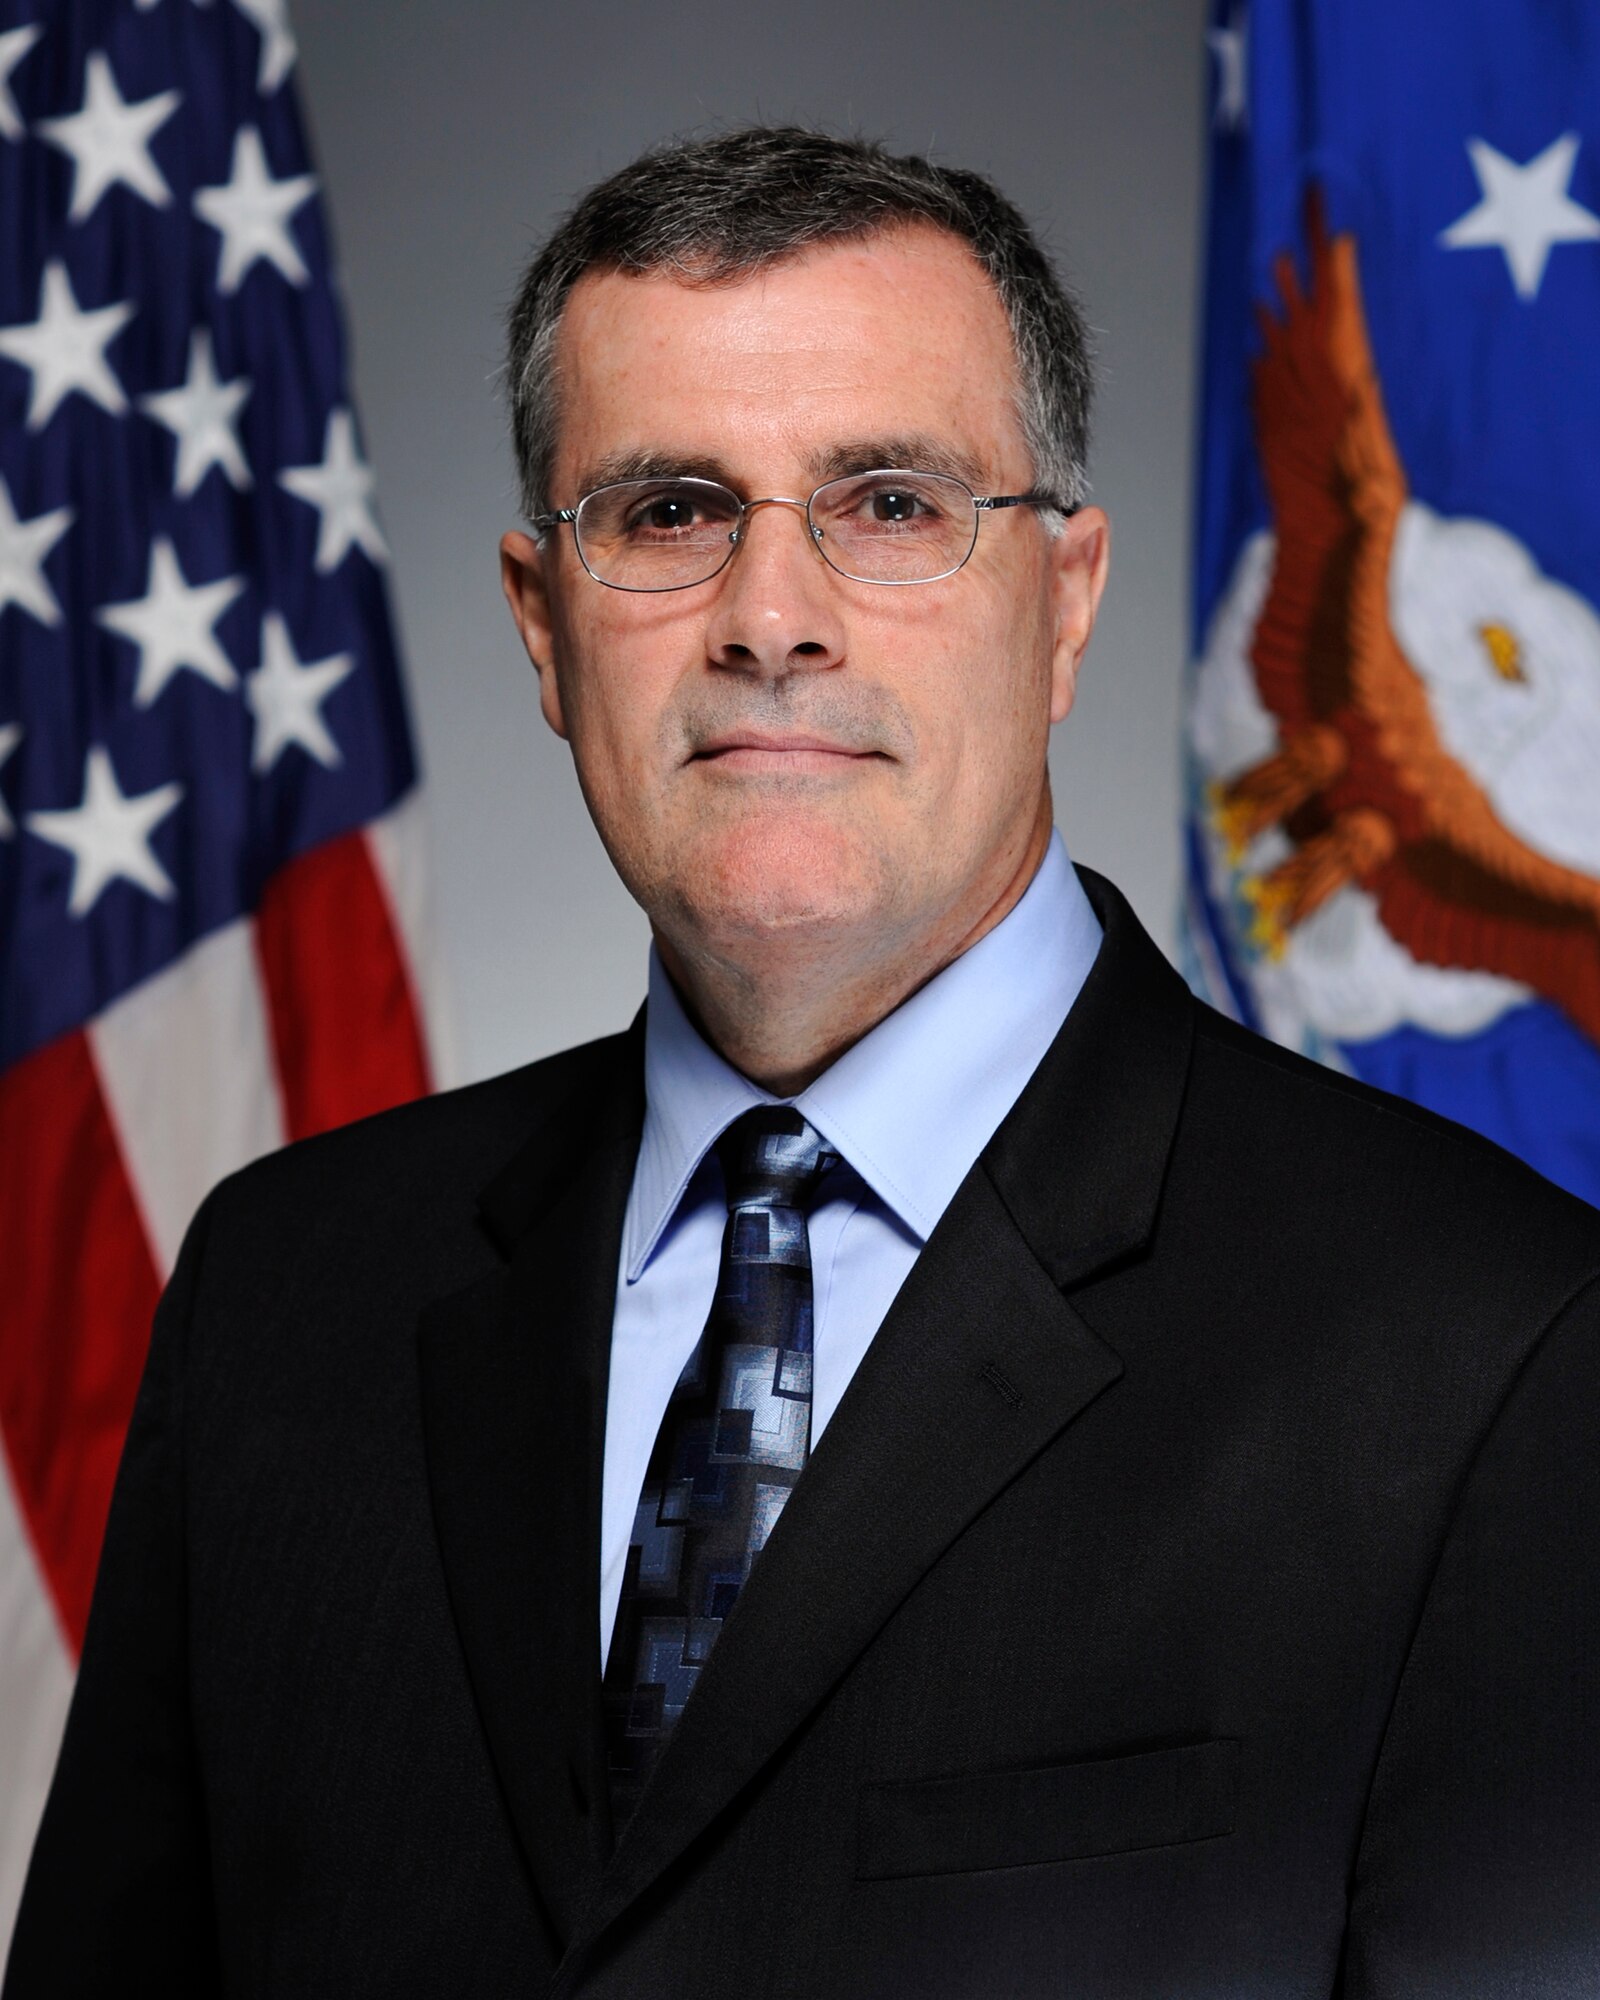 Mr. Ricky L. Peters, former AFRL executive director, received a 2015 Presidential Rank Meritorious Executive Award. (U.S. Air Force photo)